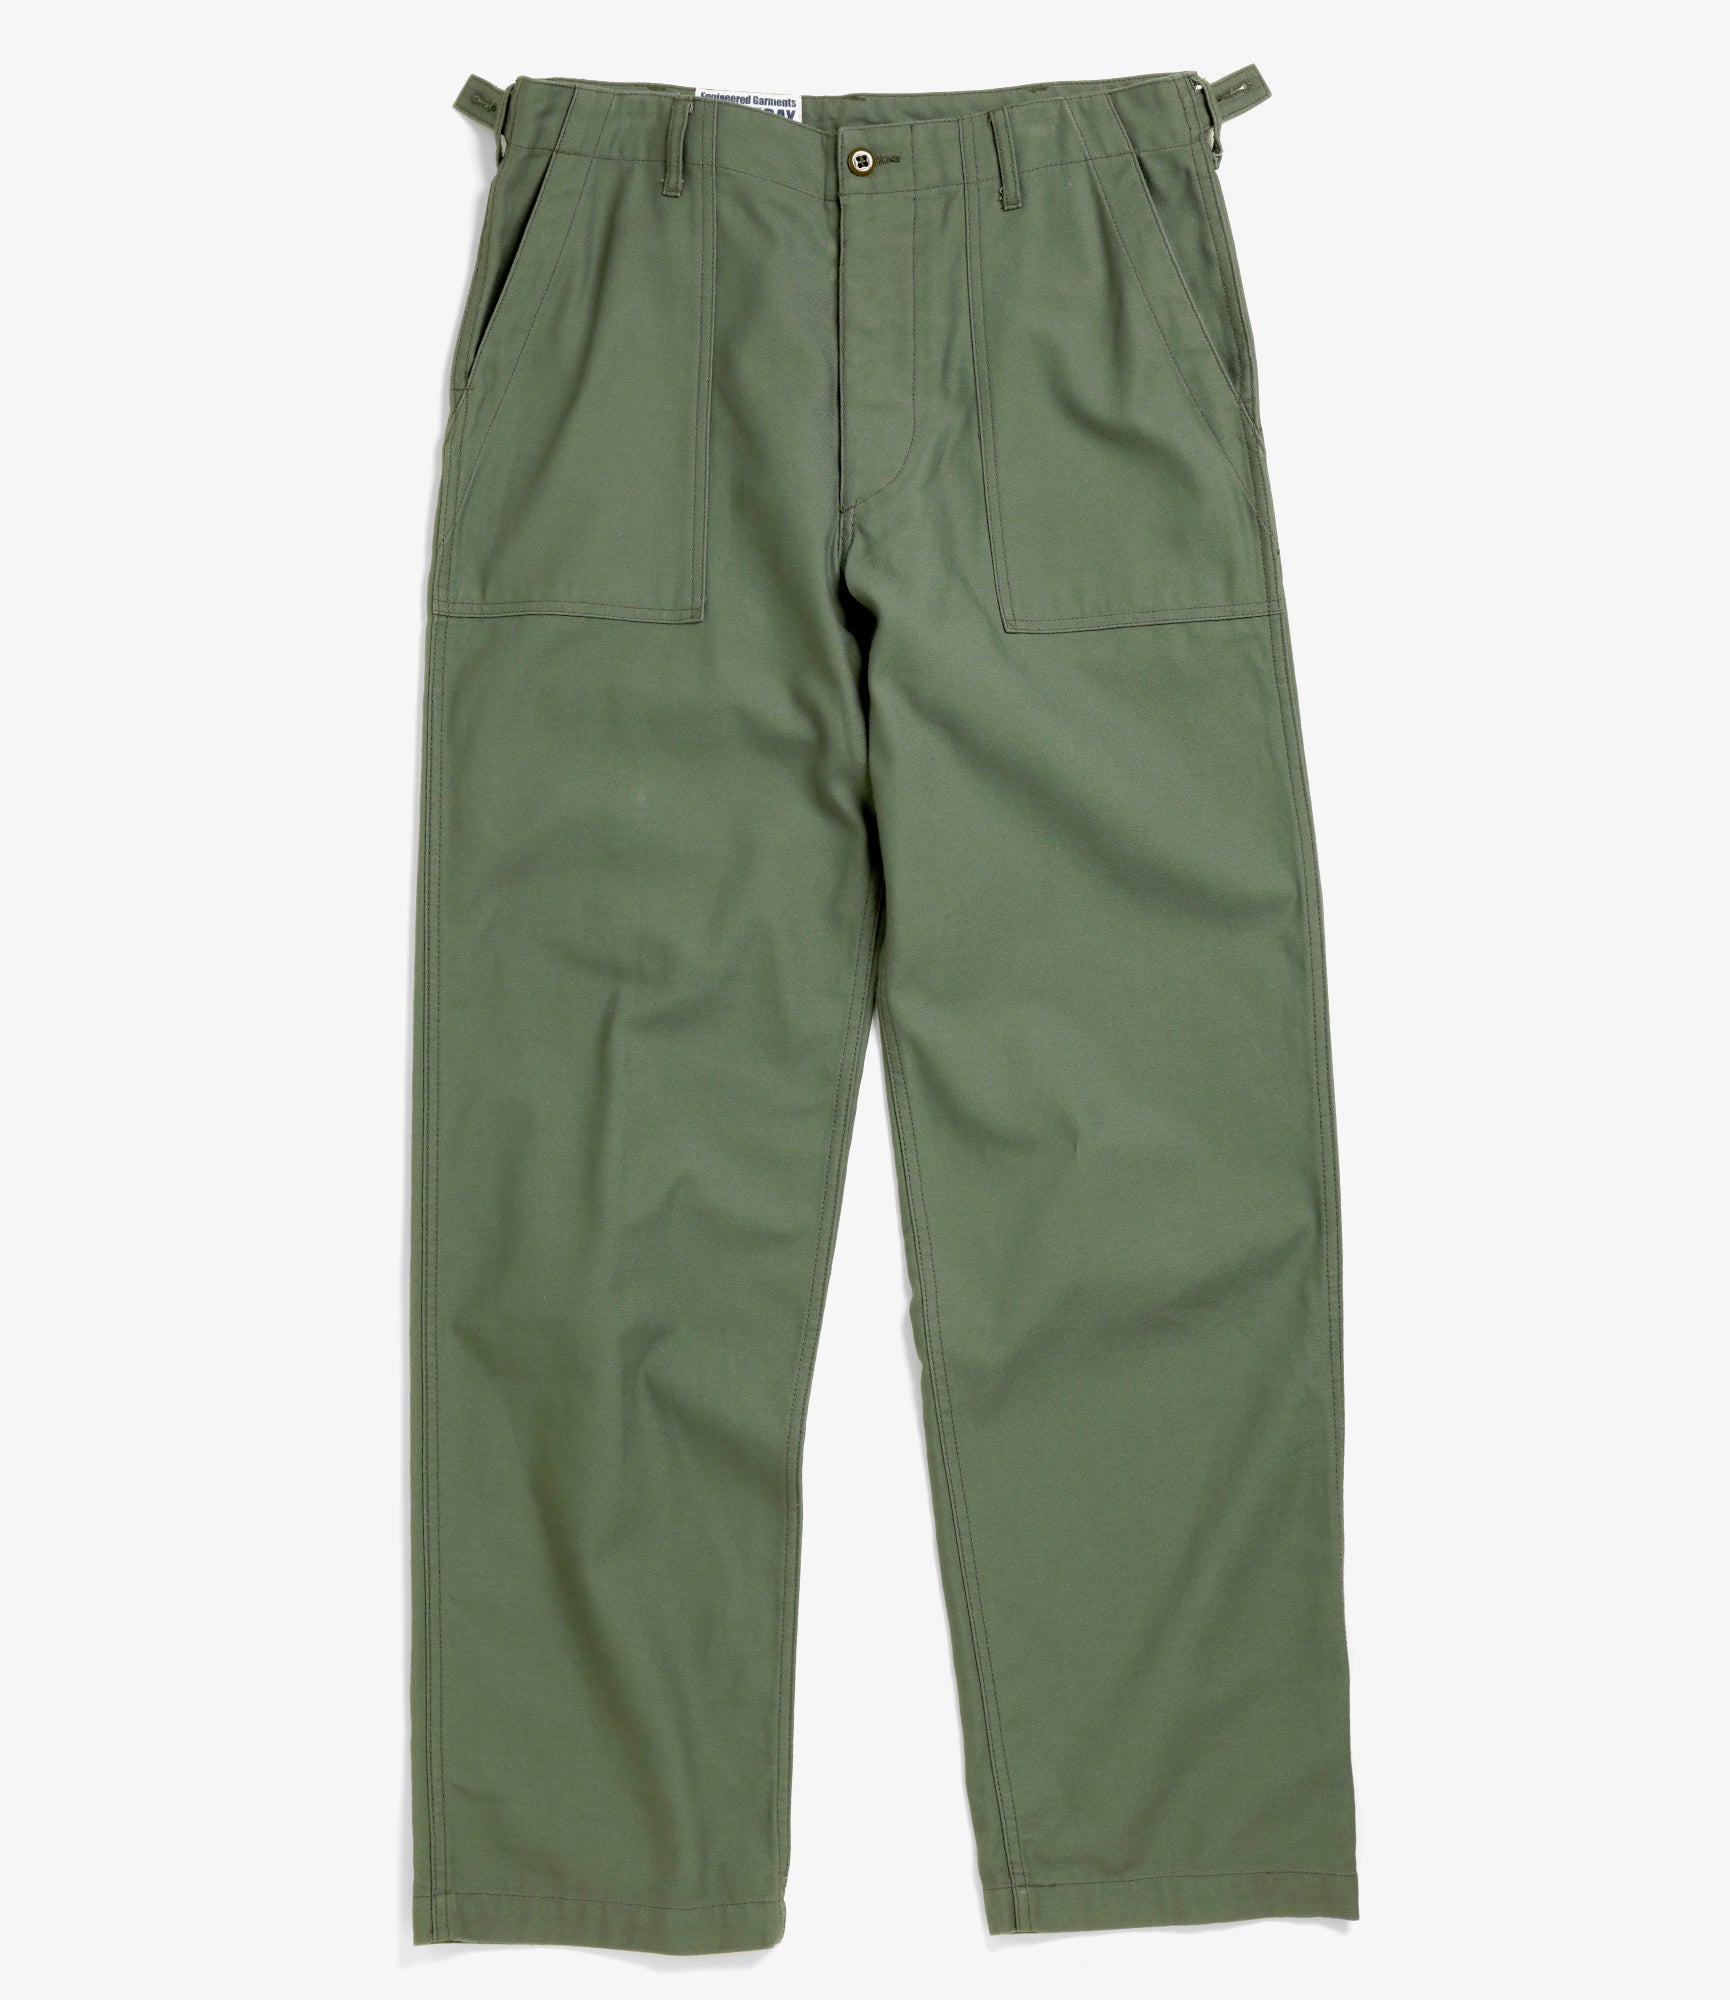 Engineered Garments Workaday Fatigue Pant Combo - Olive 